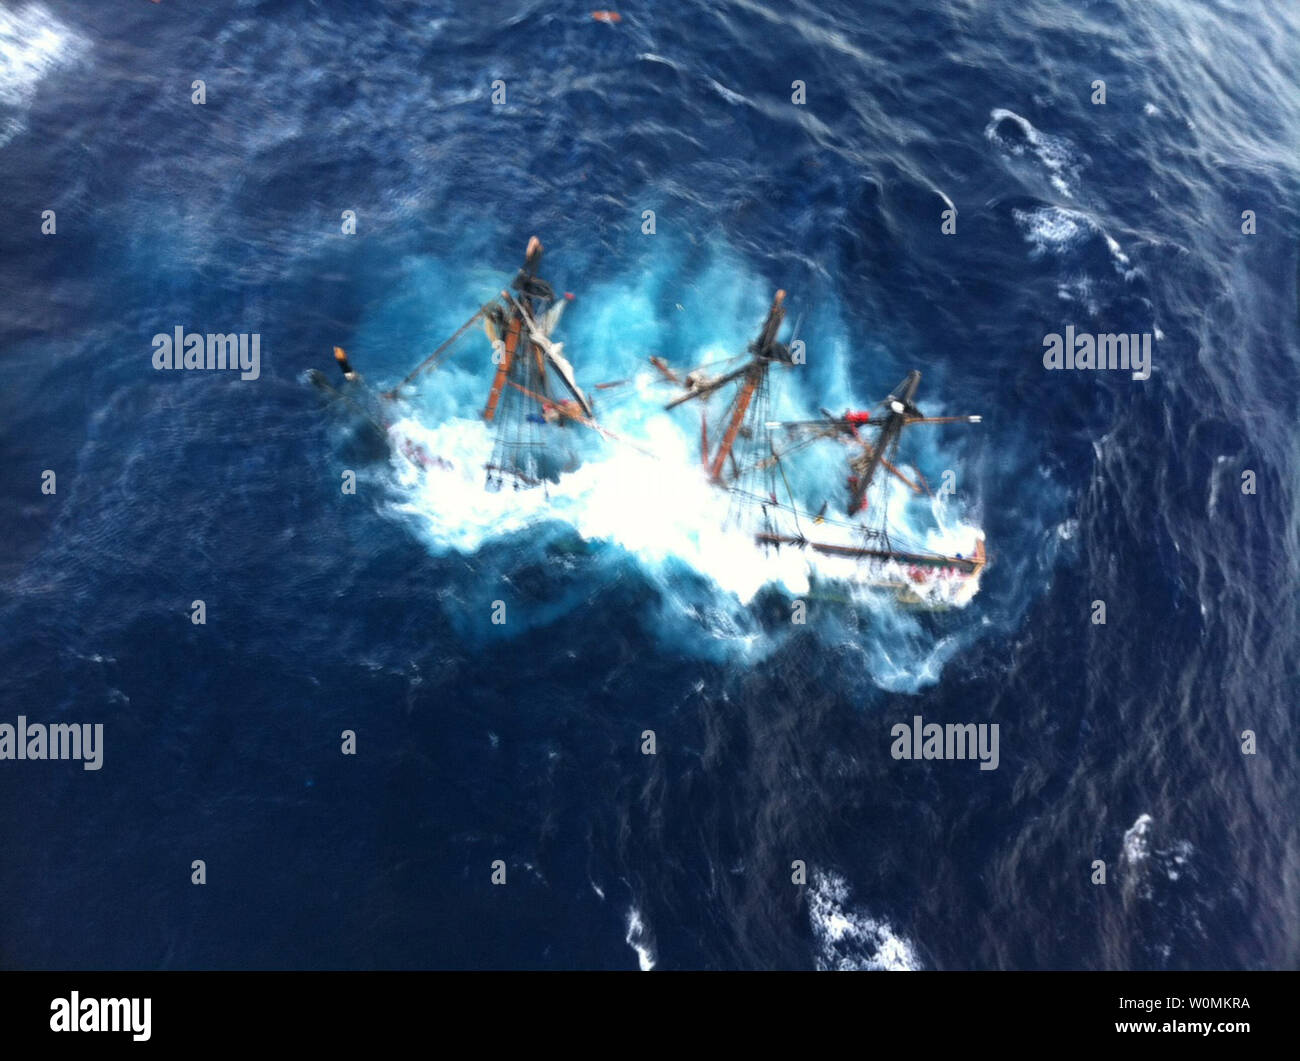 The HMS Bounty, a 180-foot sailboat, is shown submerged in the Atlantic Ocean during Hurricane Sandy approximately 90 miles southeast of Hatteras, N.C., Monday, October 29, 2012. Of the 16-person crew, the Coast Guard rescued 14, recovered one body and is searching for the captain of the vessel.   UPI/Tim Kuklewski/Coast Guard Stock Photo